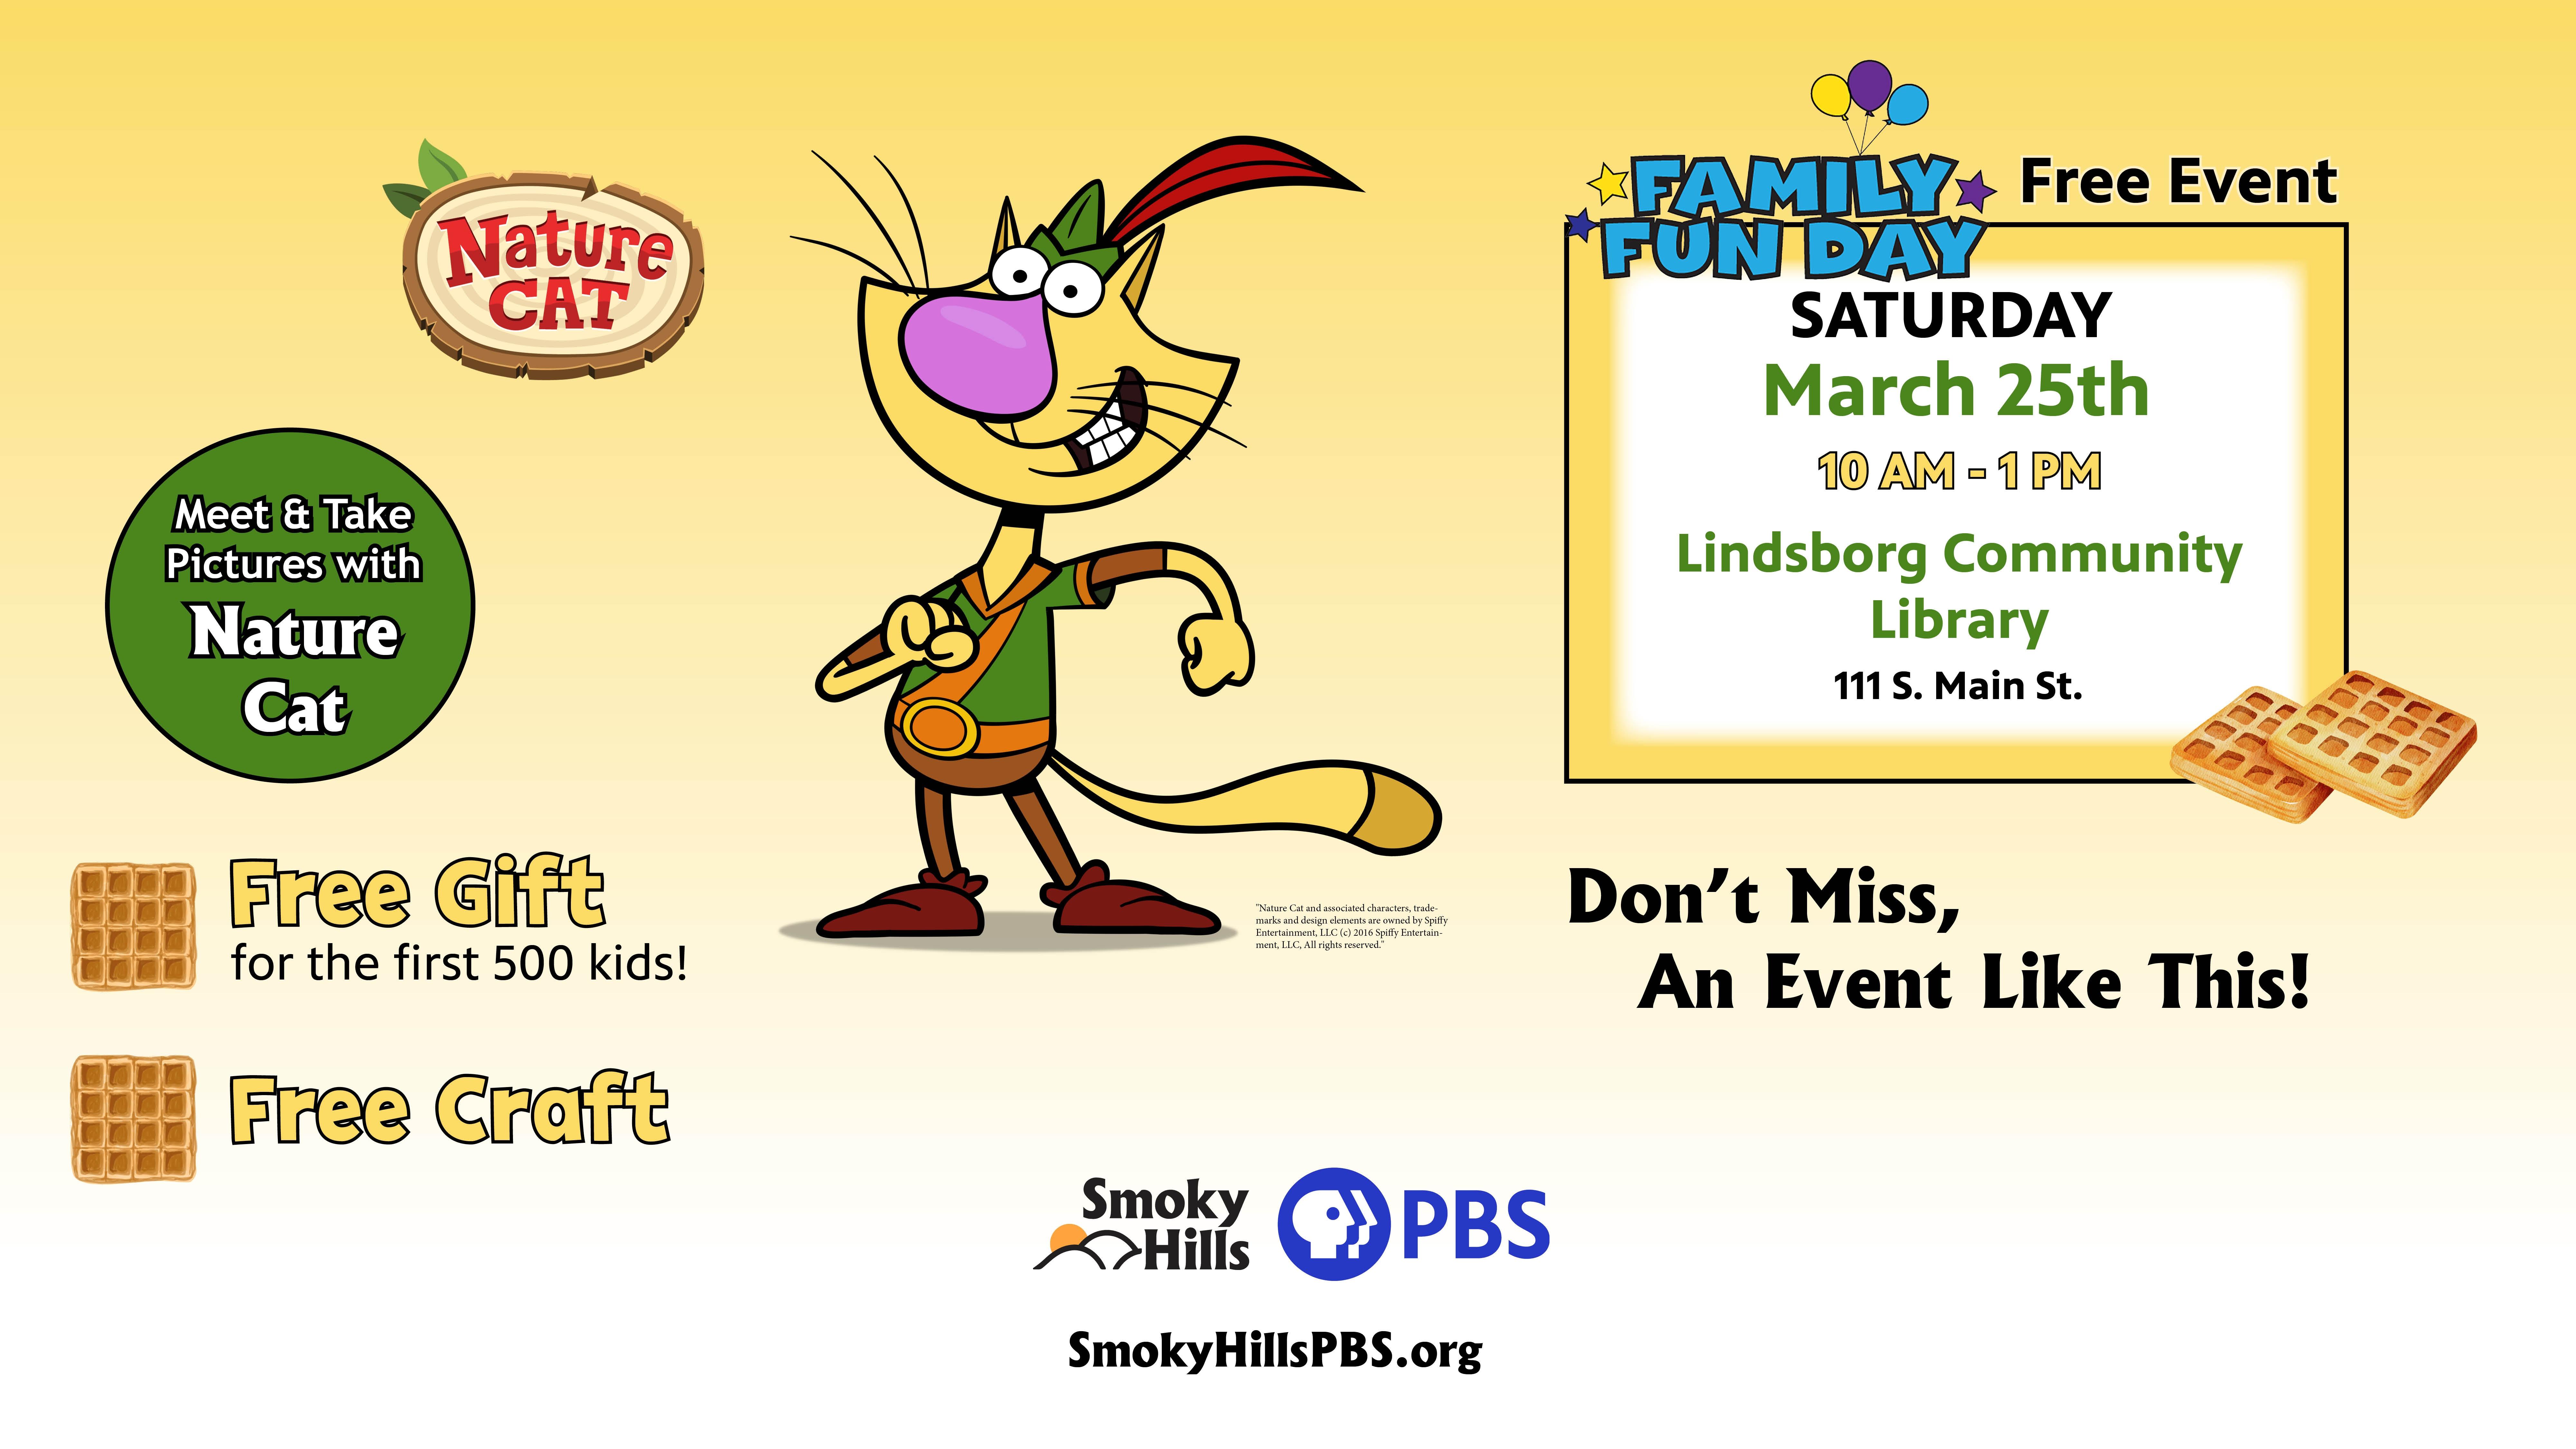 Family Fun Day in Lindsborg on March 25th 10 am - 1 pm